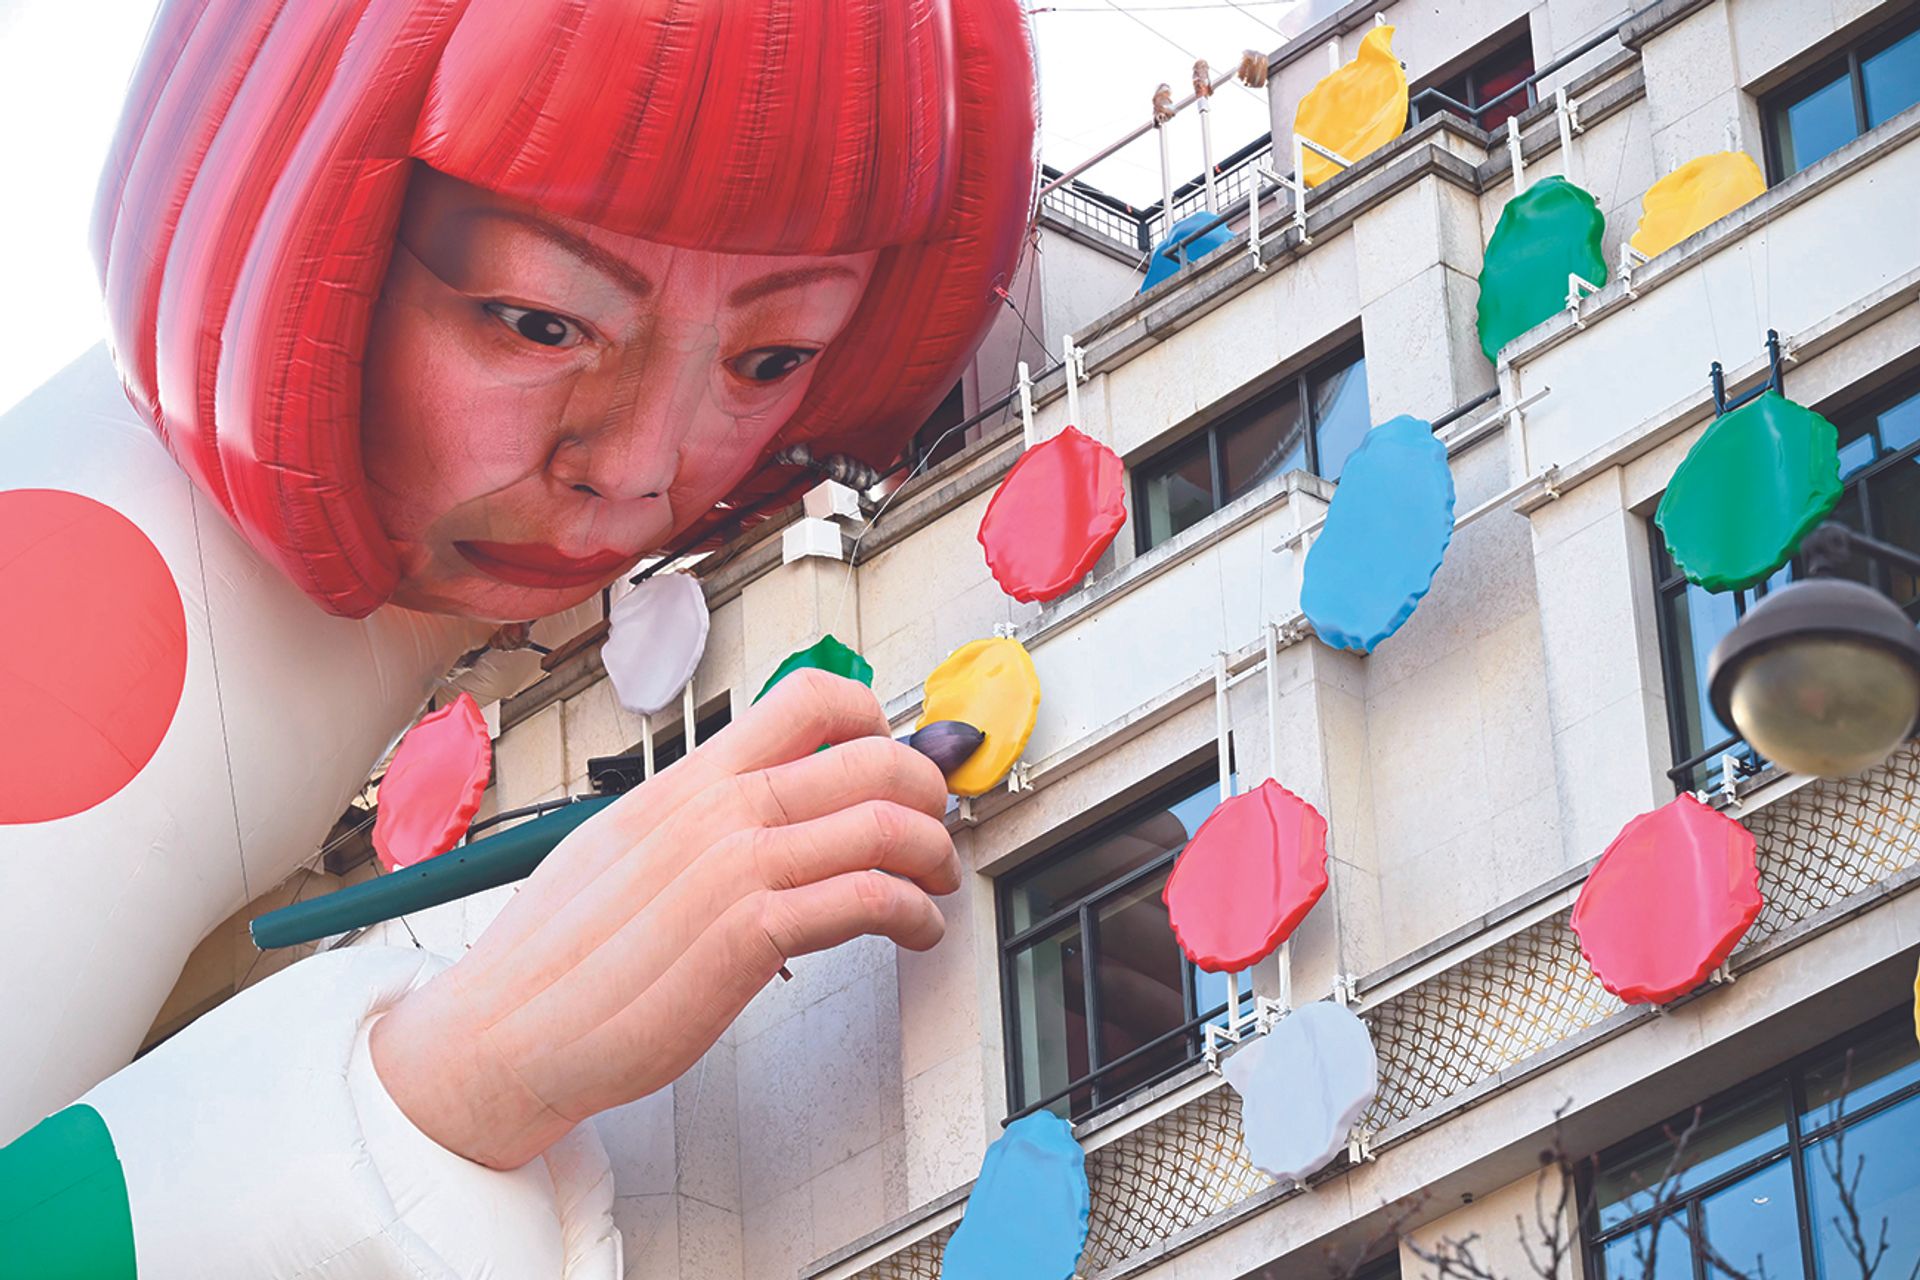 A large inflatable mannequin depicting Japanese contemporary artist Yayoi Kusama decorating the French luxury brand Louis Vuitton flagship store on the Champs-Elysees avenue in Paris

Photo: Emmanuel DUNAND / AFP